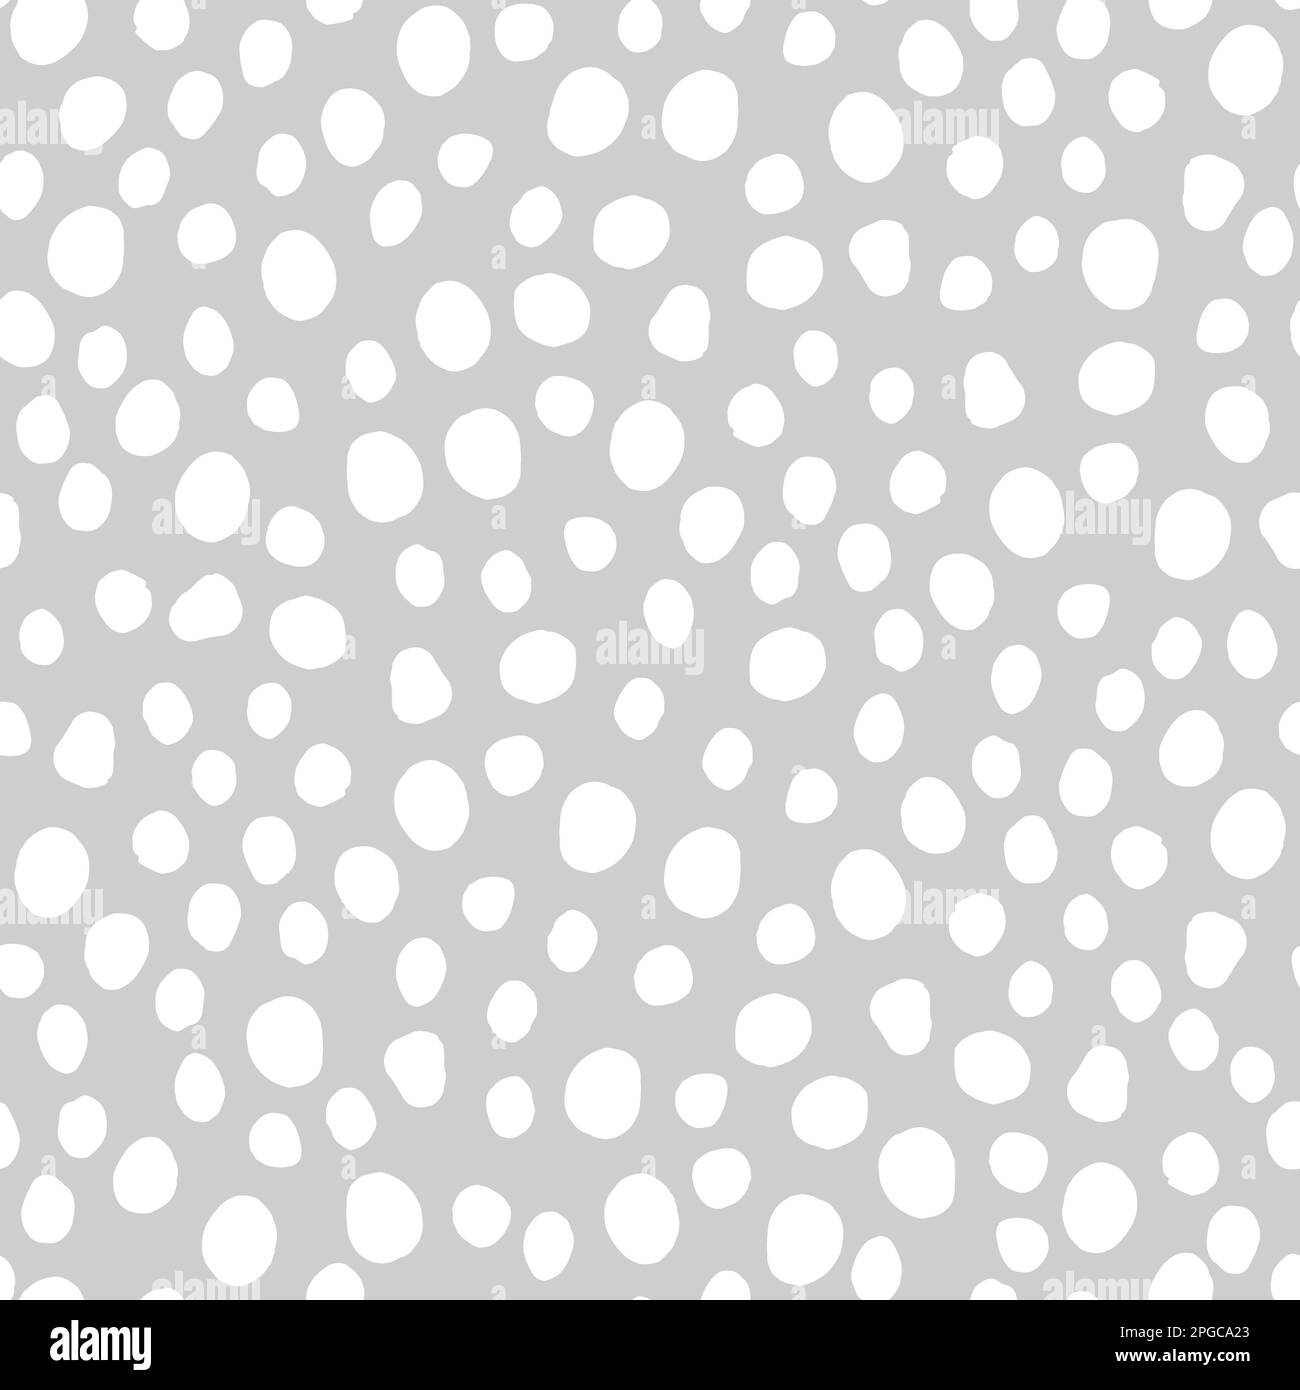 Seamless neutral polka dots pattern. White hand-drawn circles isolated on Grey background. Abstract Random points ornament. Vector illustration for wa Stock Vector